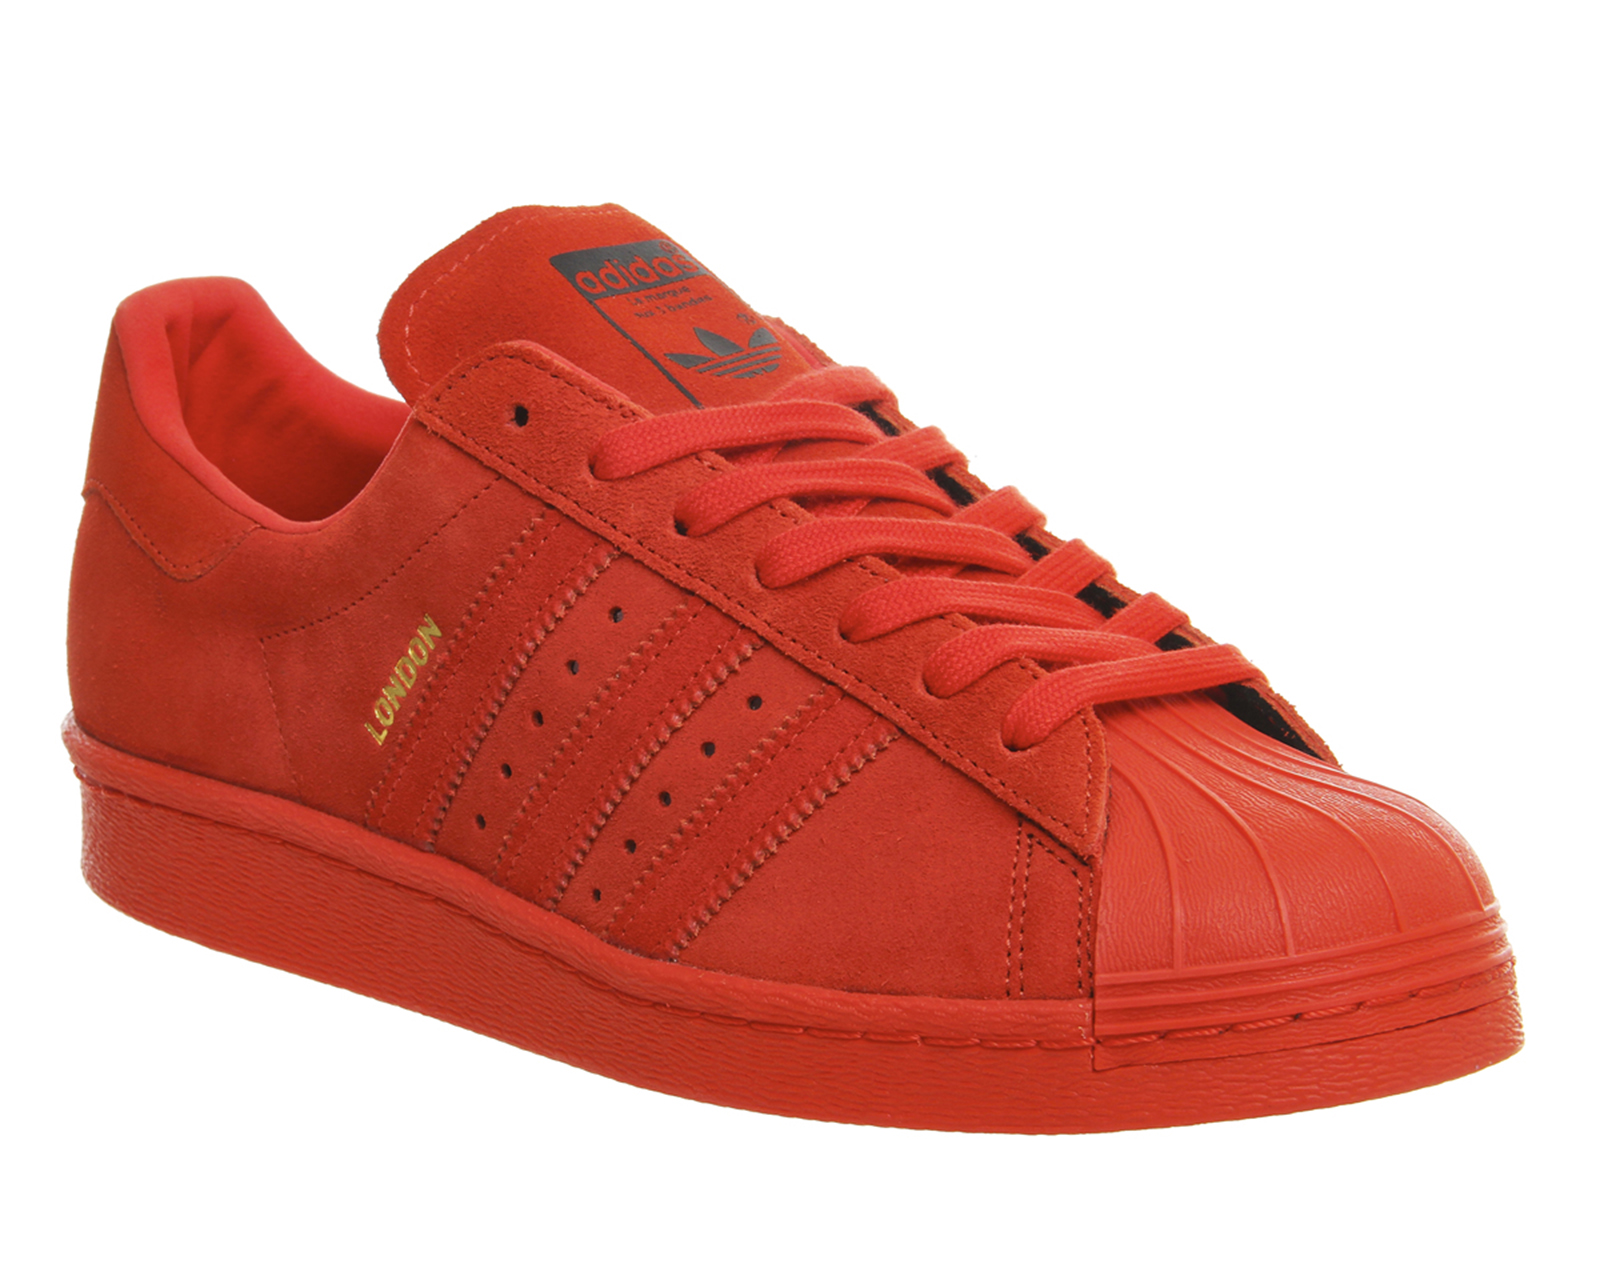 adidas Superstar 80s City Pack Red London - Unisex Sports